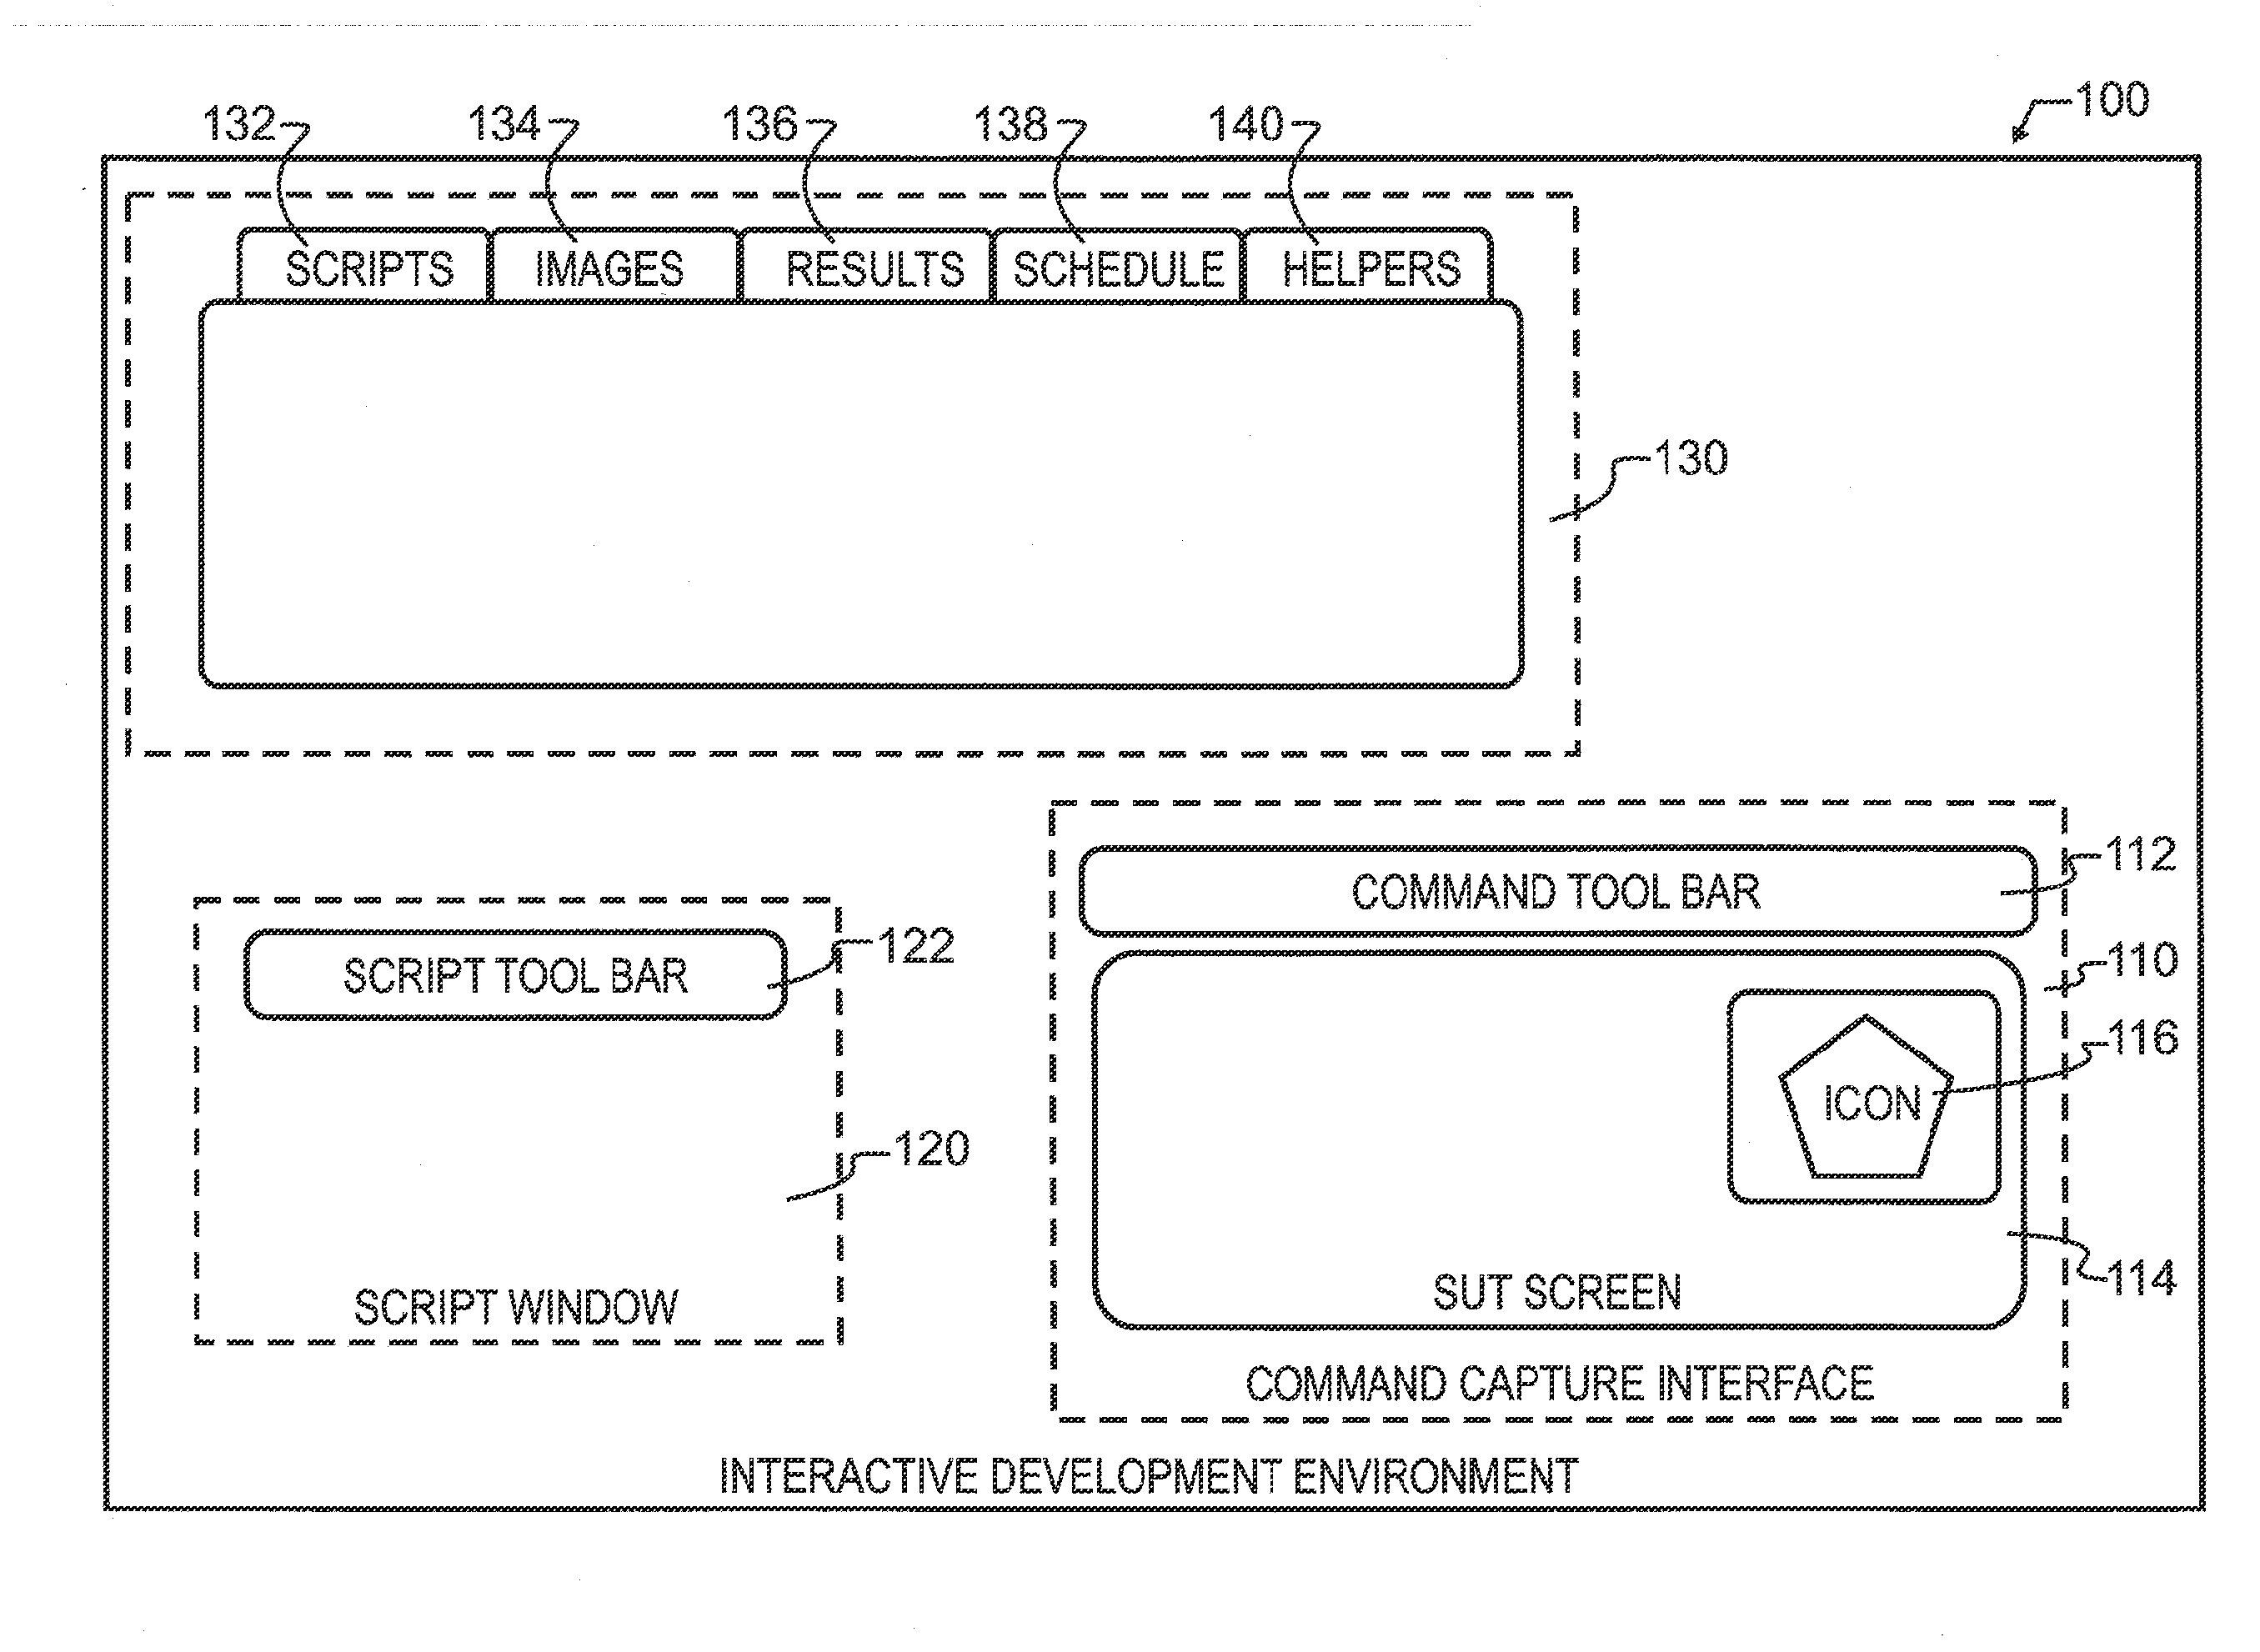 Method for monitoring a graphical user interface on a second computer display from a first computer